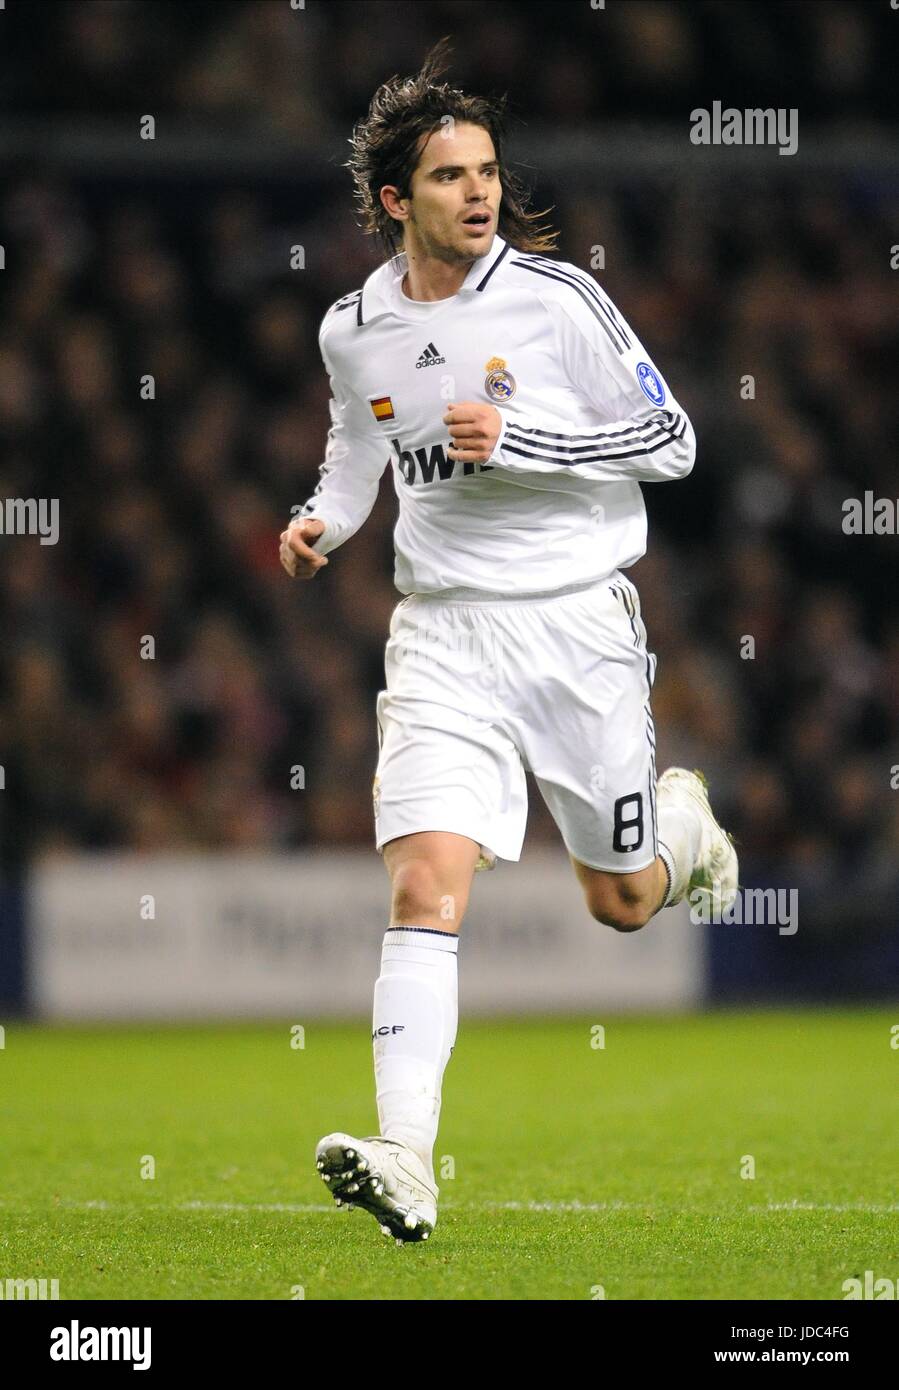 FERNANDO GAGO REAL MADRID ANFIELD LIVERPOOL ENGLAND 10 March 2009 Stock Photo